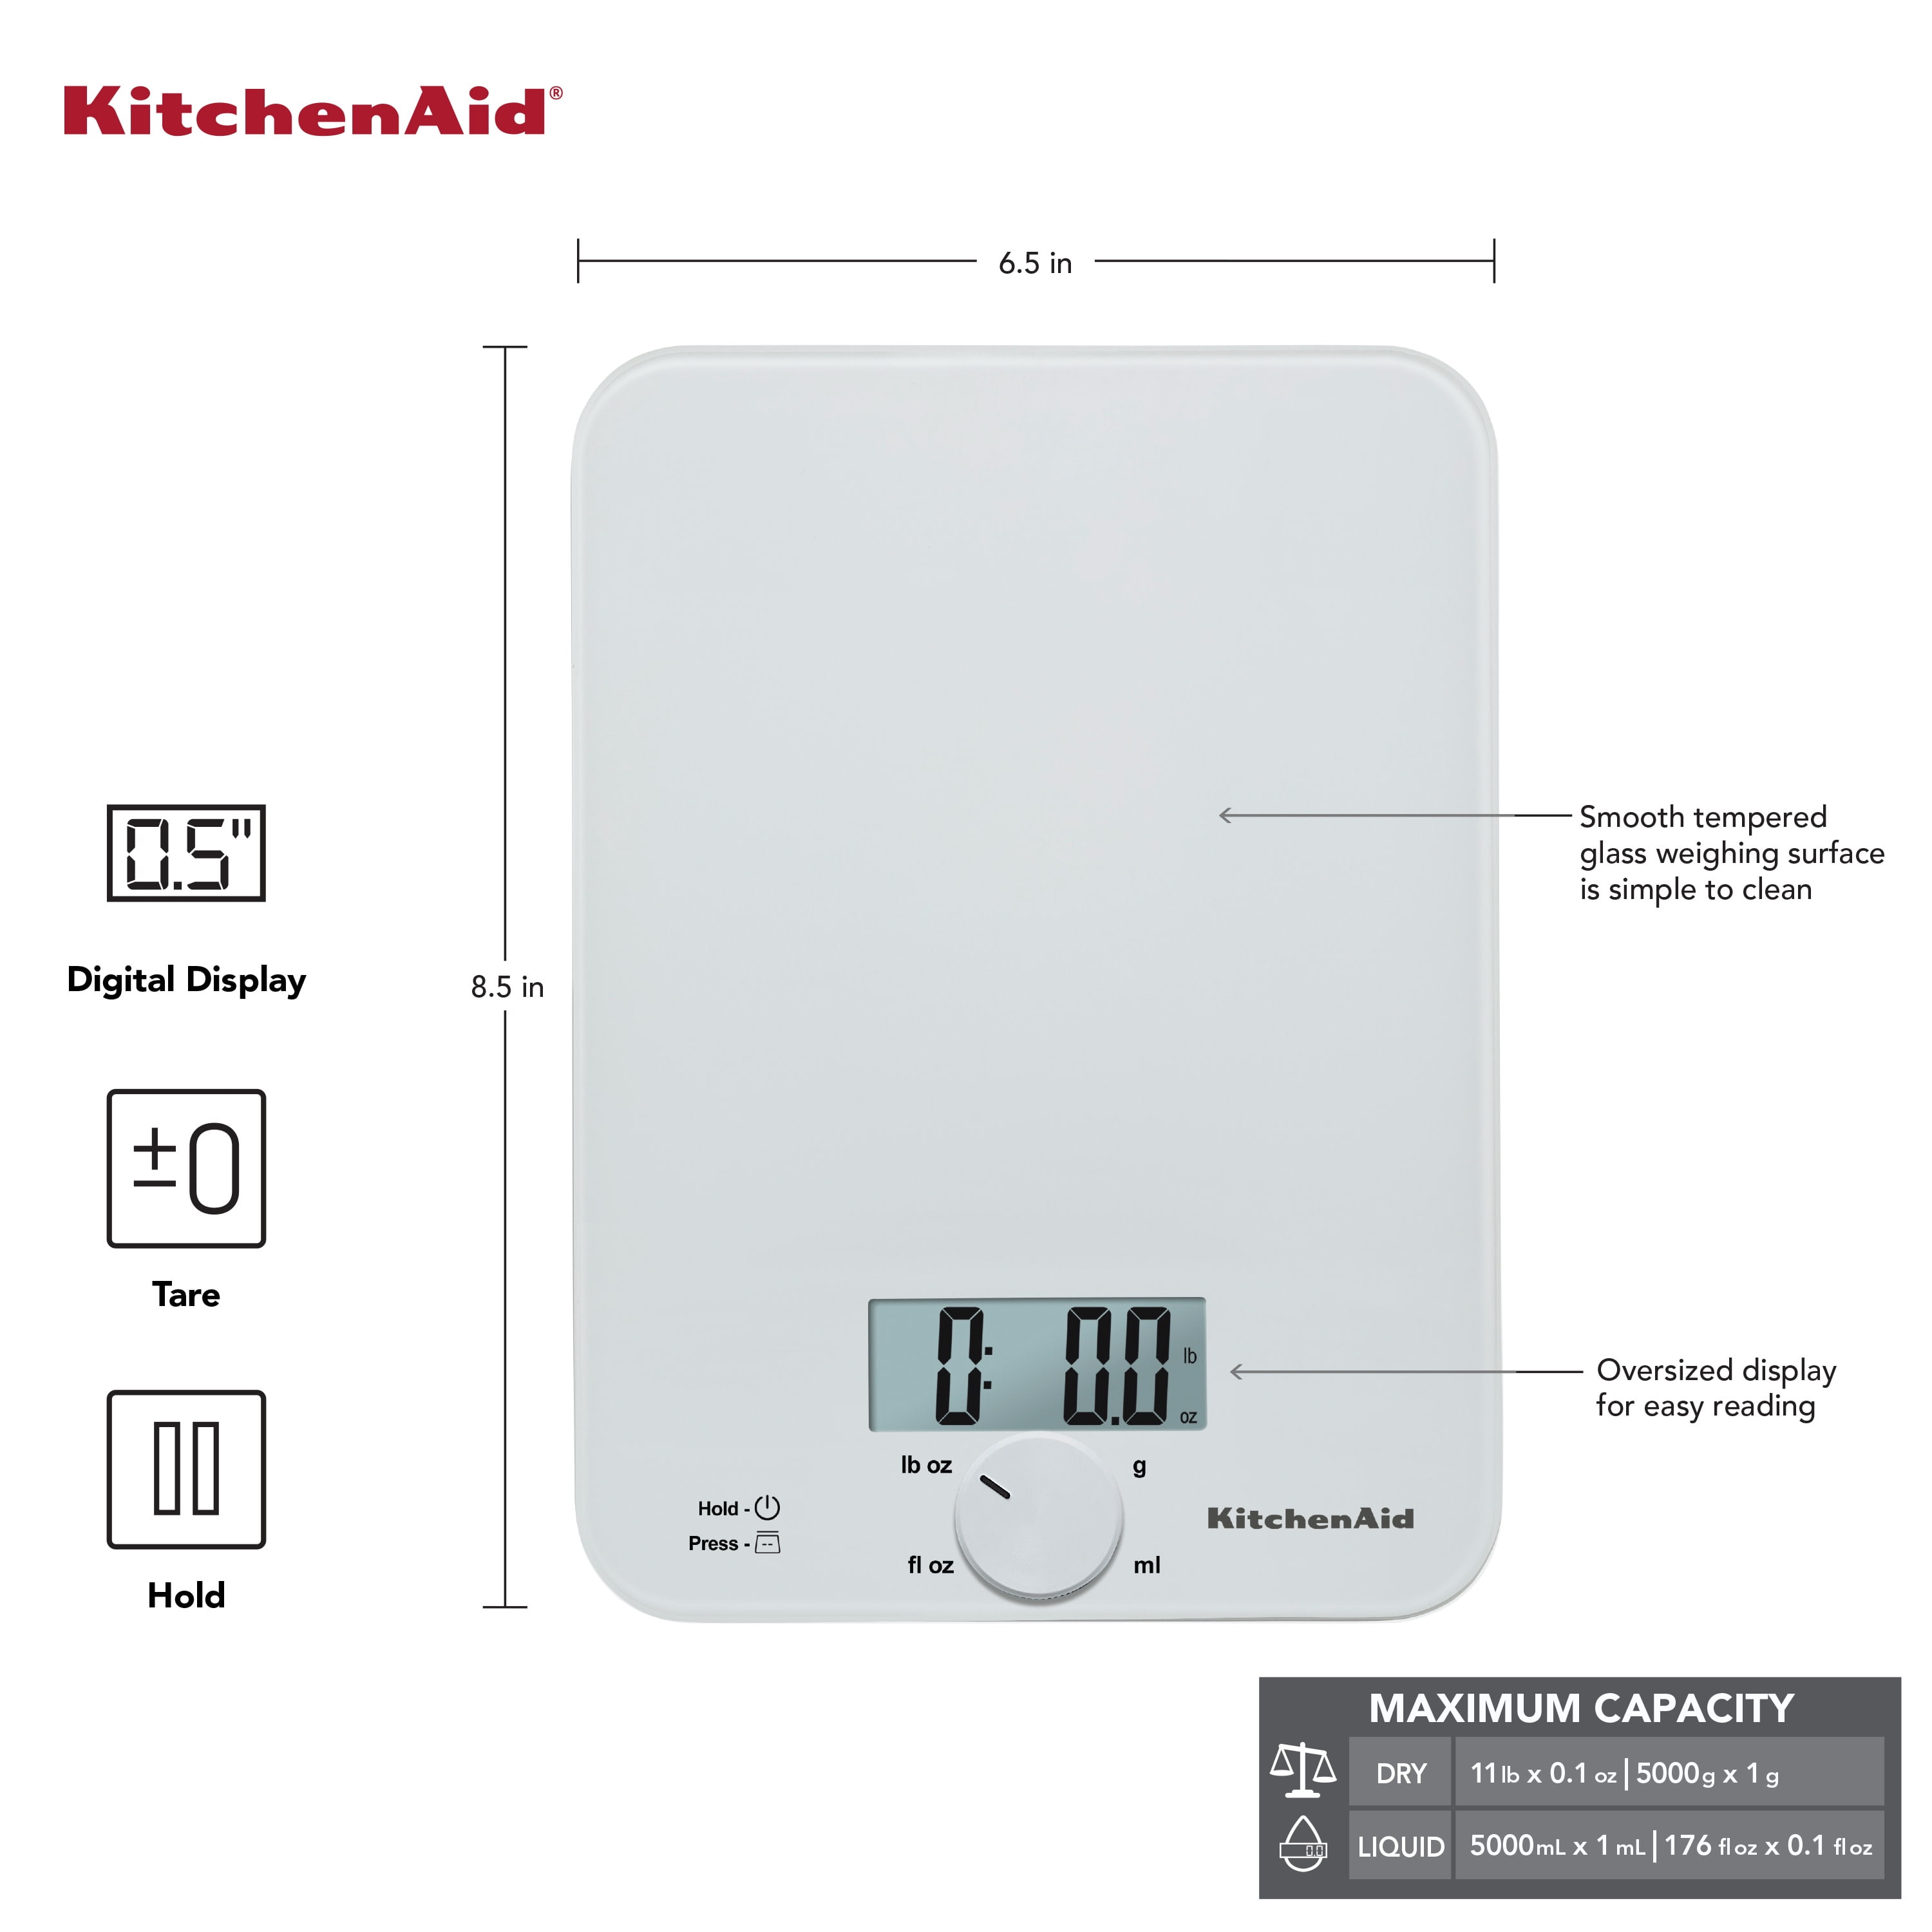 New KitchenAid 11lb Glass surface kitchen scale for Sale in